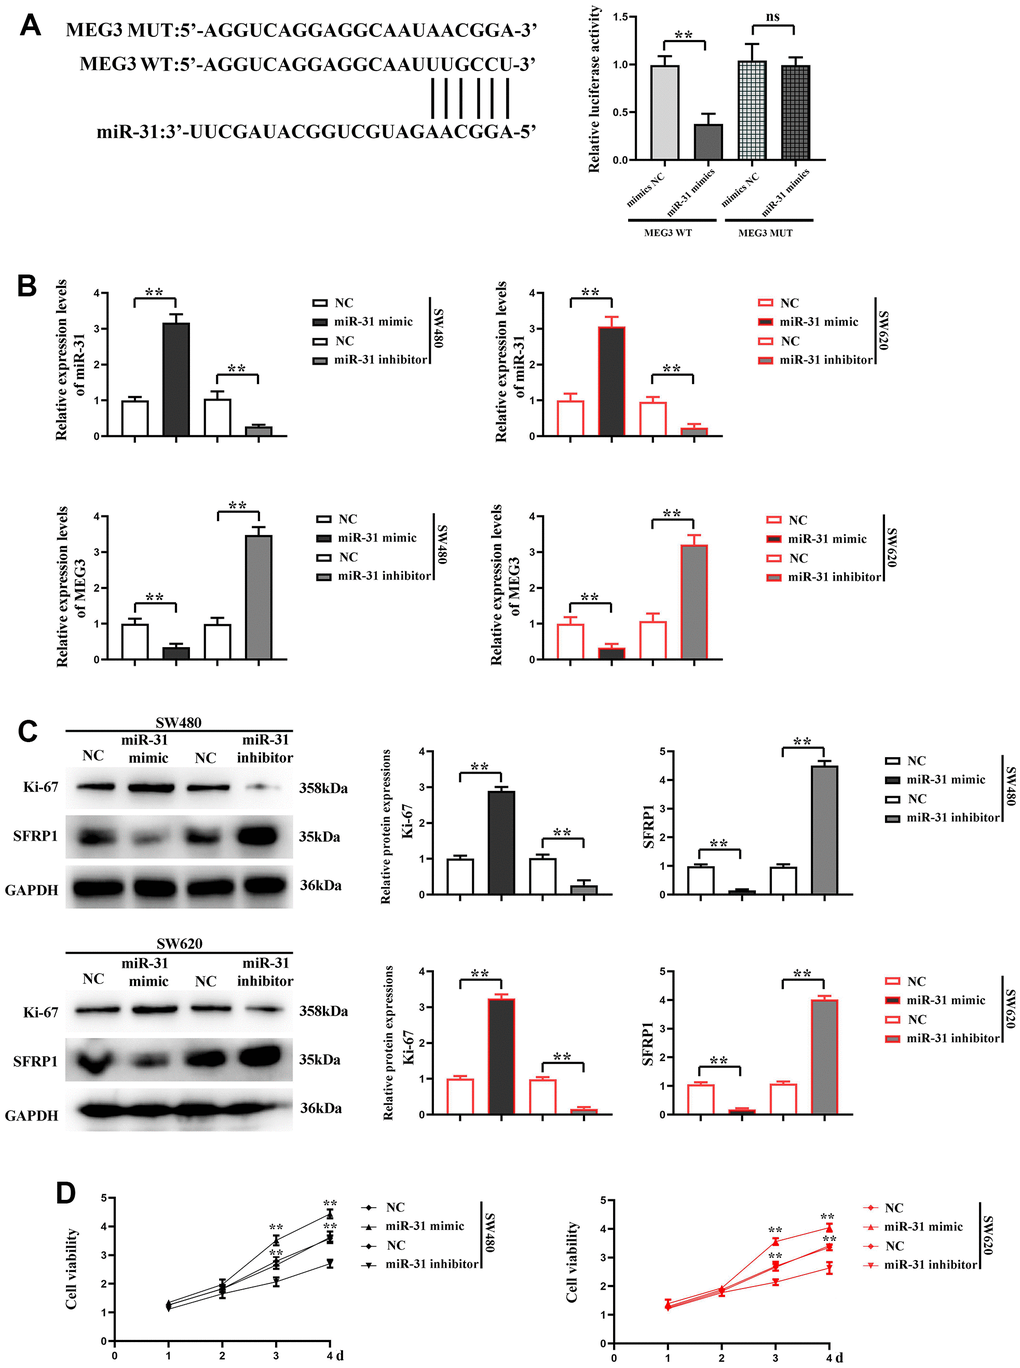 miR-31 can affect the expression of MEG3 in CRC cells and promote the proliferation of CRC cells. (A) dual luciferase assay results; (B) RT-qPCR detected the expression of miR-31 and MEG3 in each group; (C) Relative protein expression of SFRP1 and Ki-67 in each group; (D) CCK8 detected the proliferation of SW620 and SW480 cells. **P